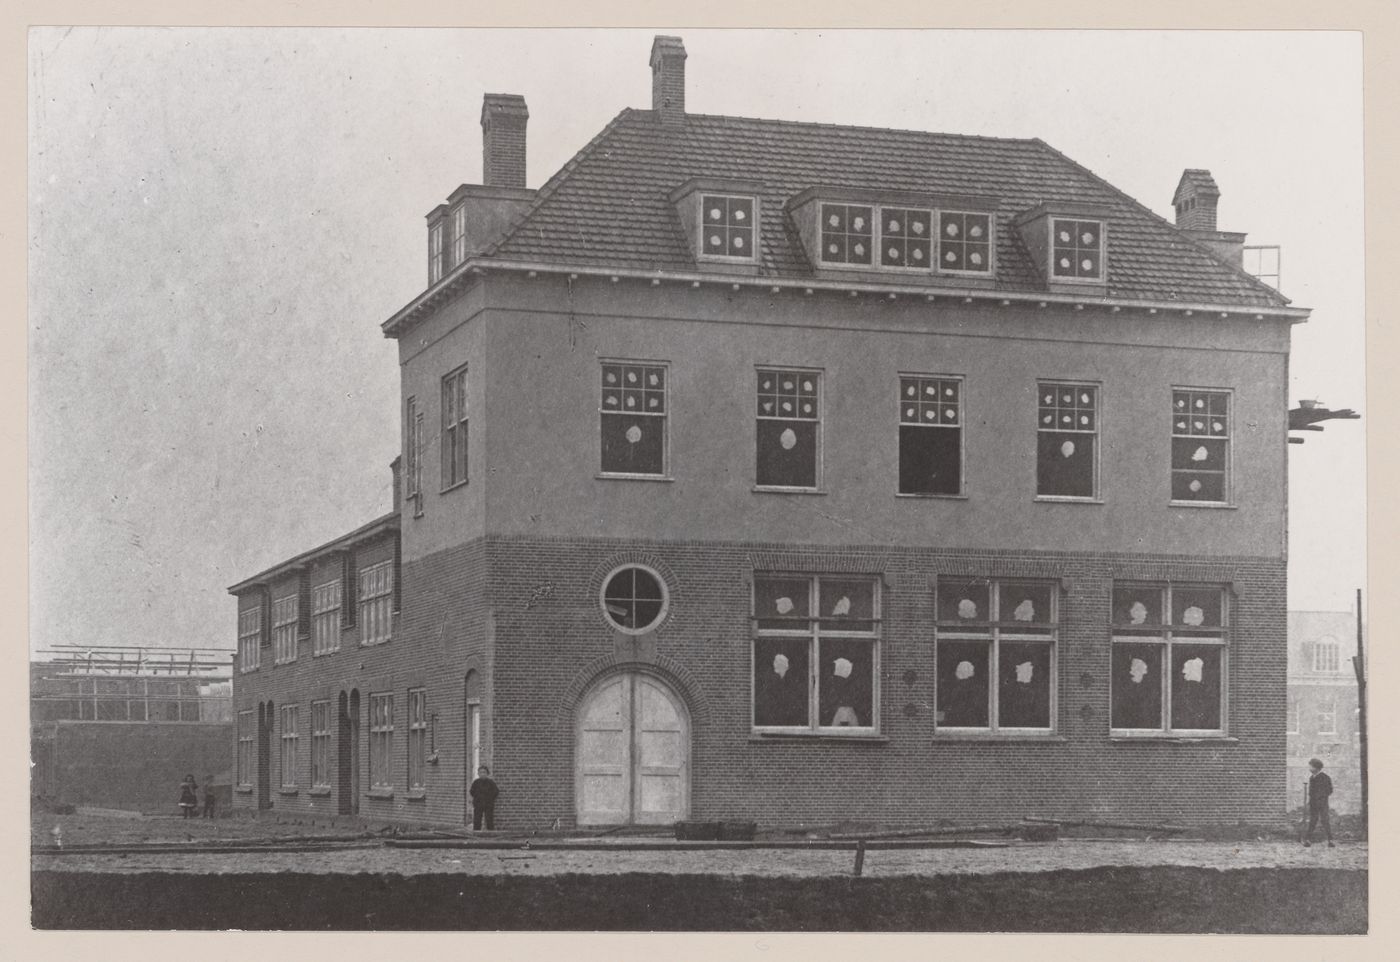 Exterior view of the meeting hall and houses, Vooruit Cooperative, Purmerend, Netherlands